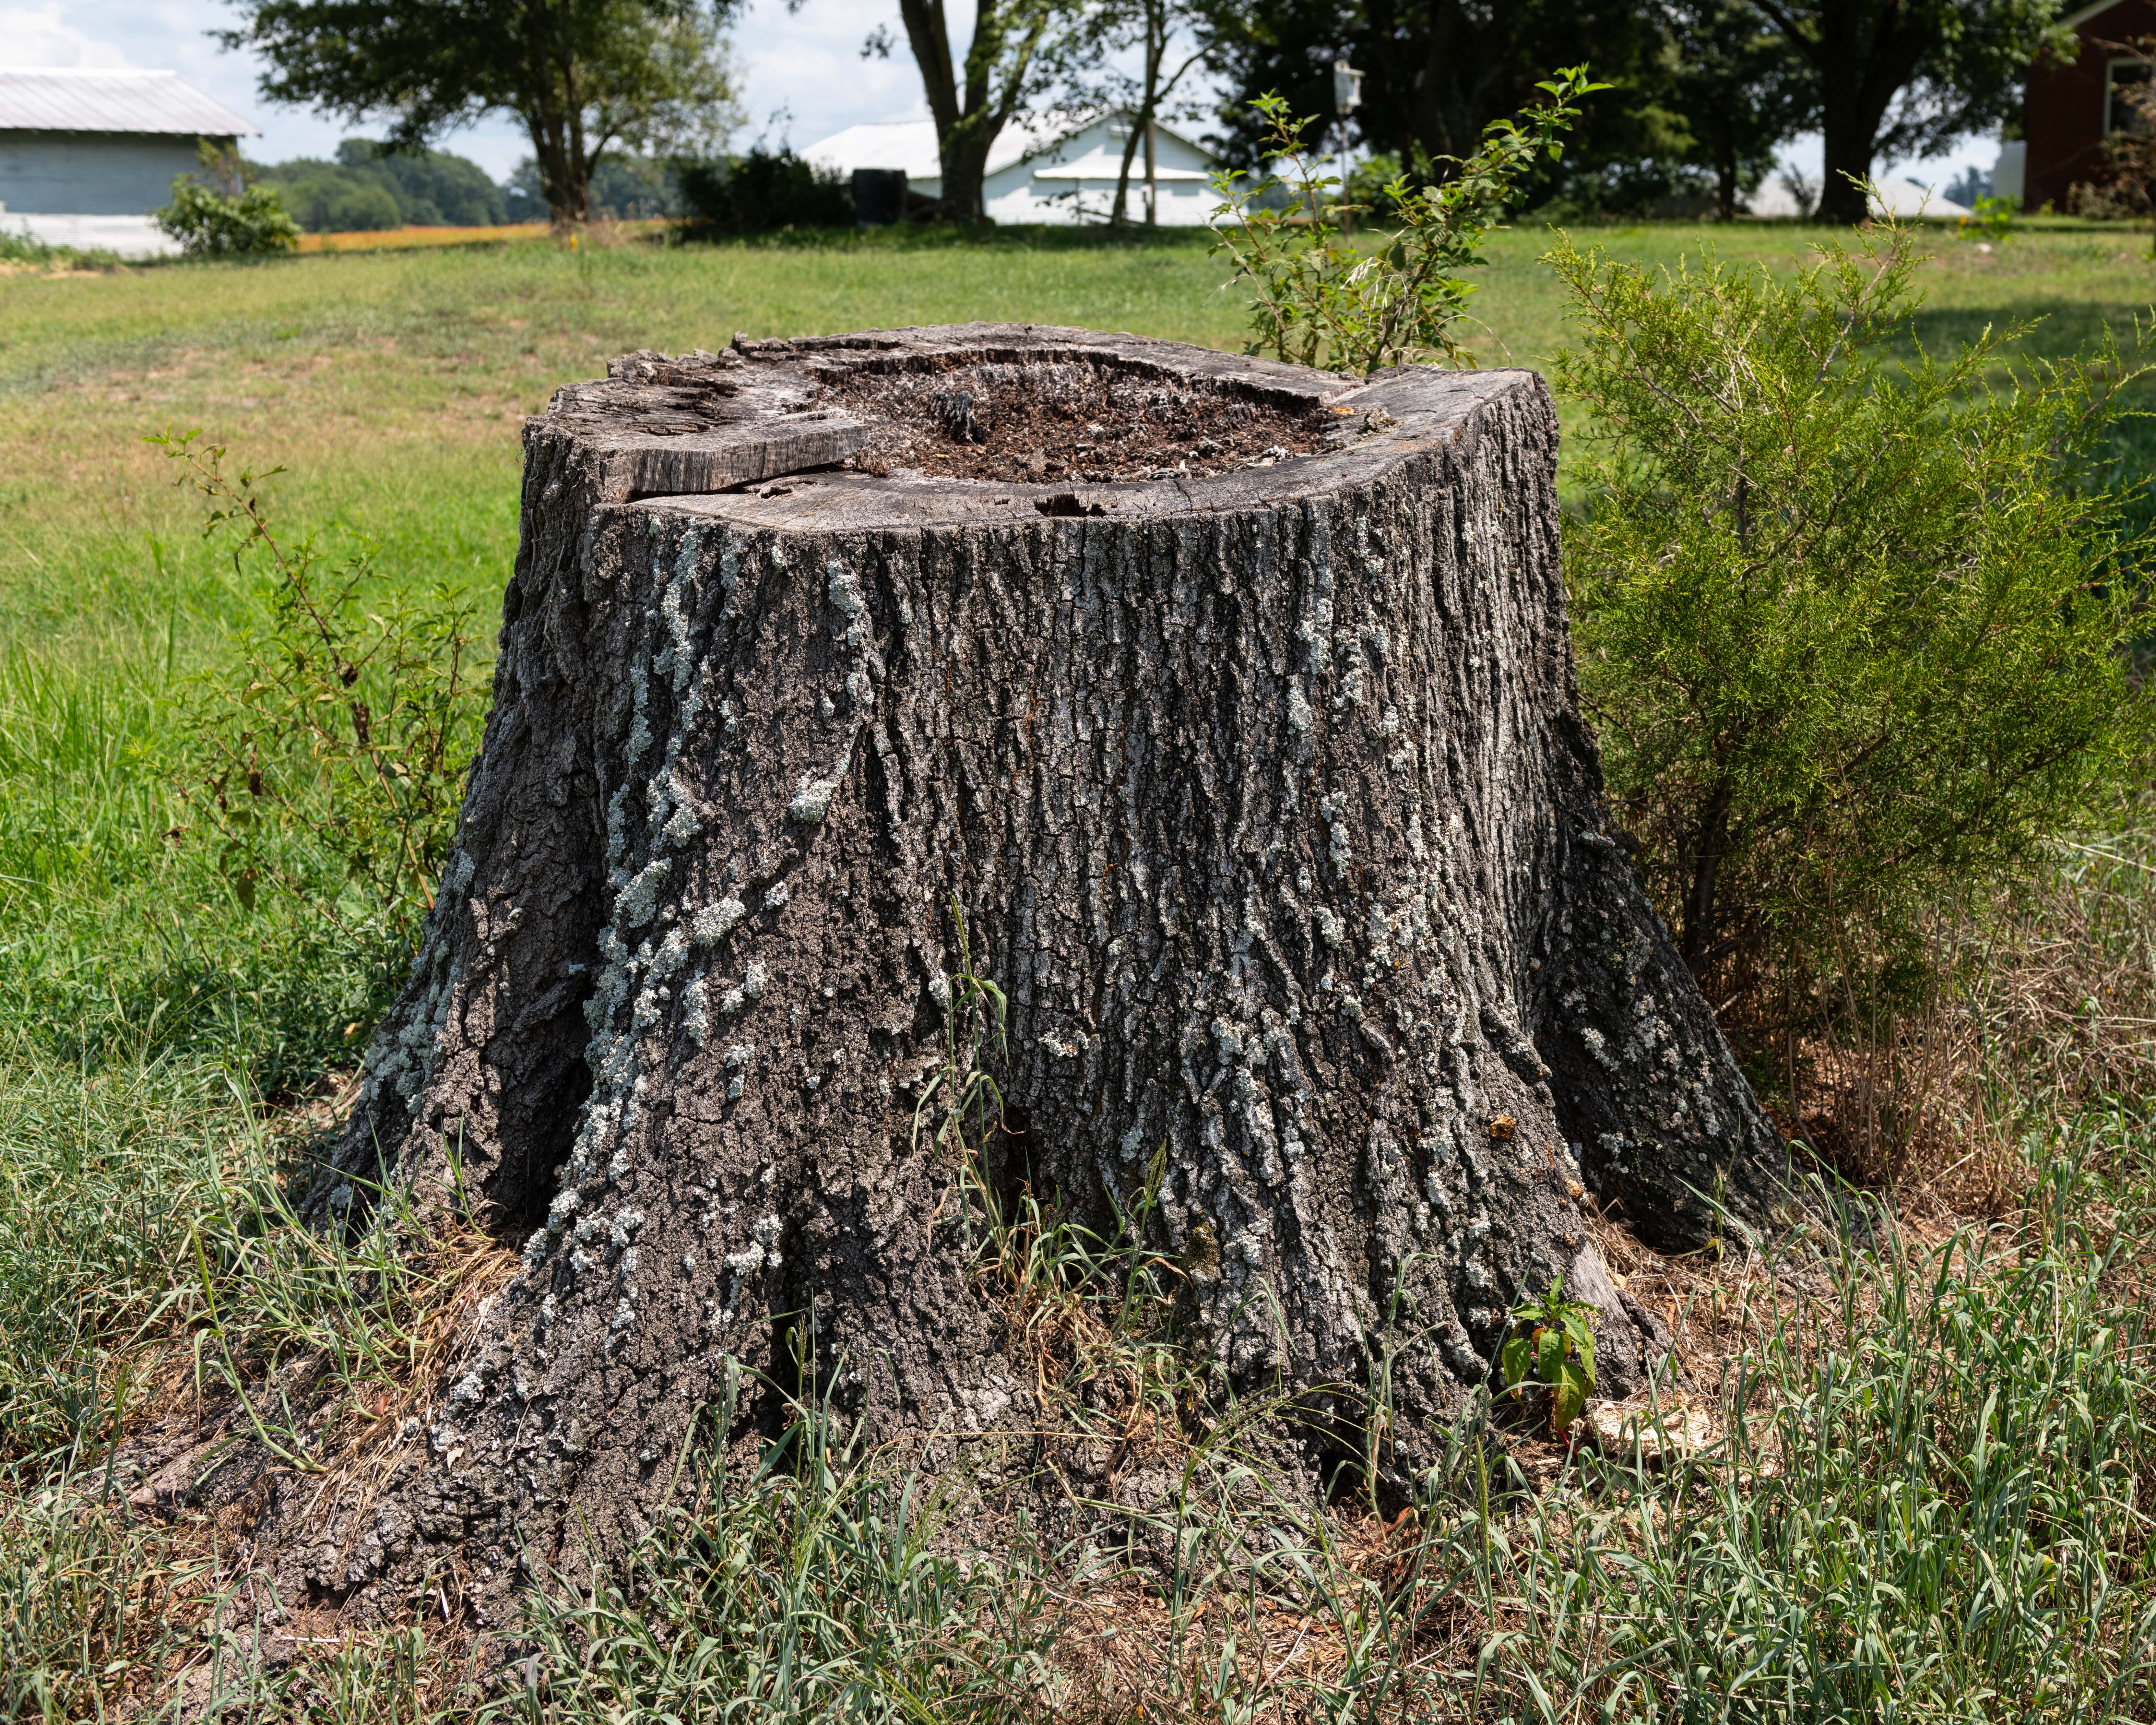 an image of an old tree stump in a grass area